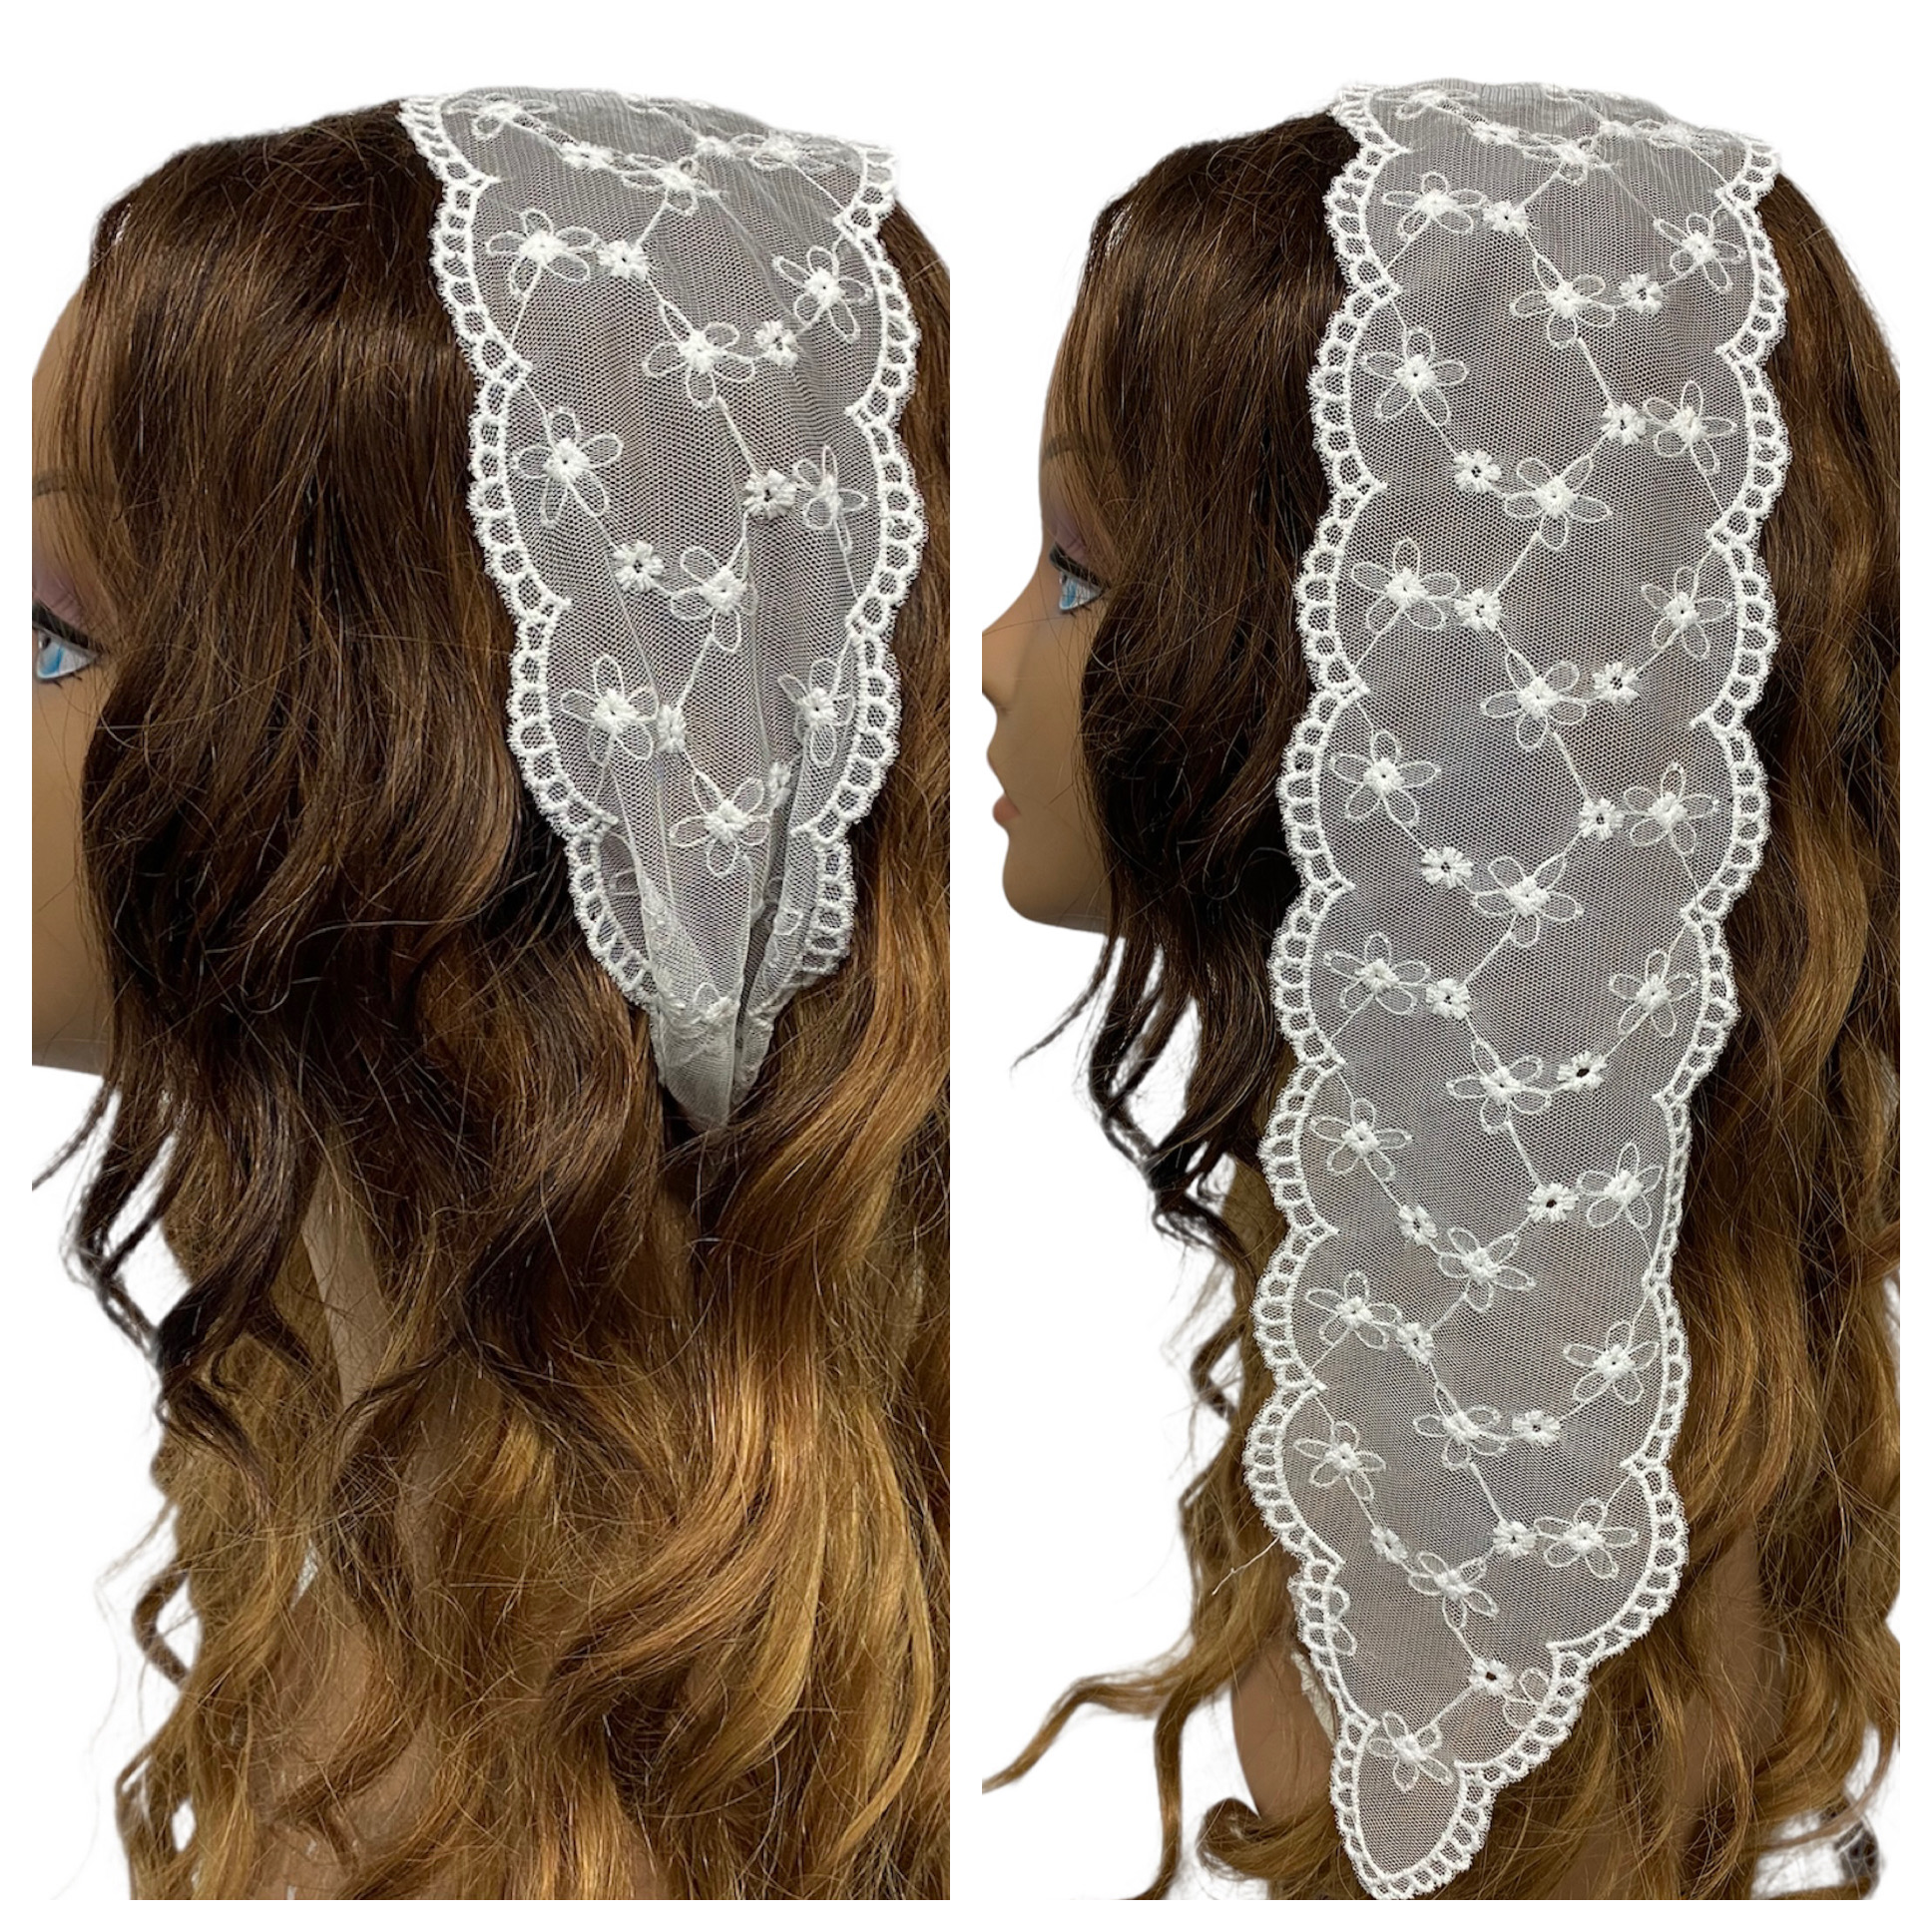 New OB Skinny Lace Floral Embroidered Headband Scarf-White